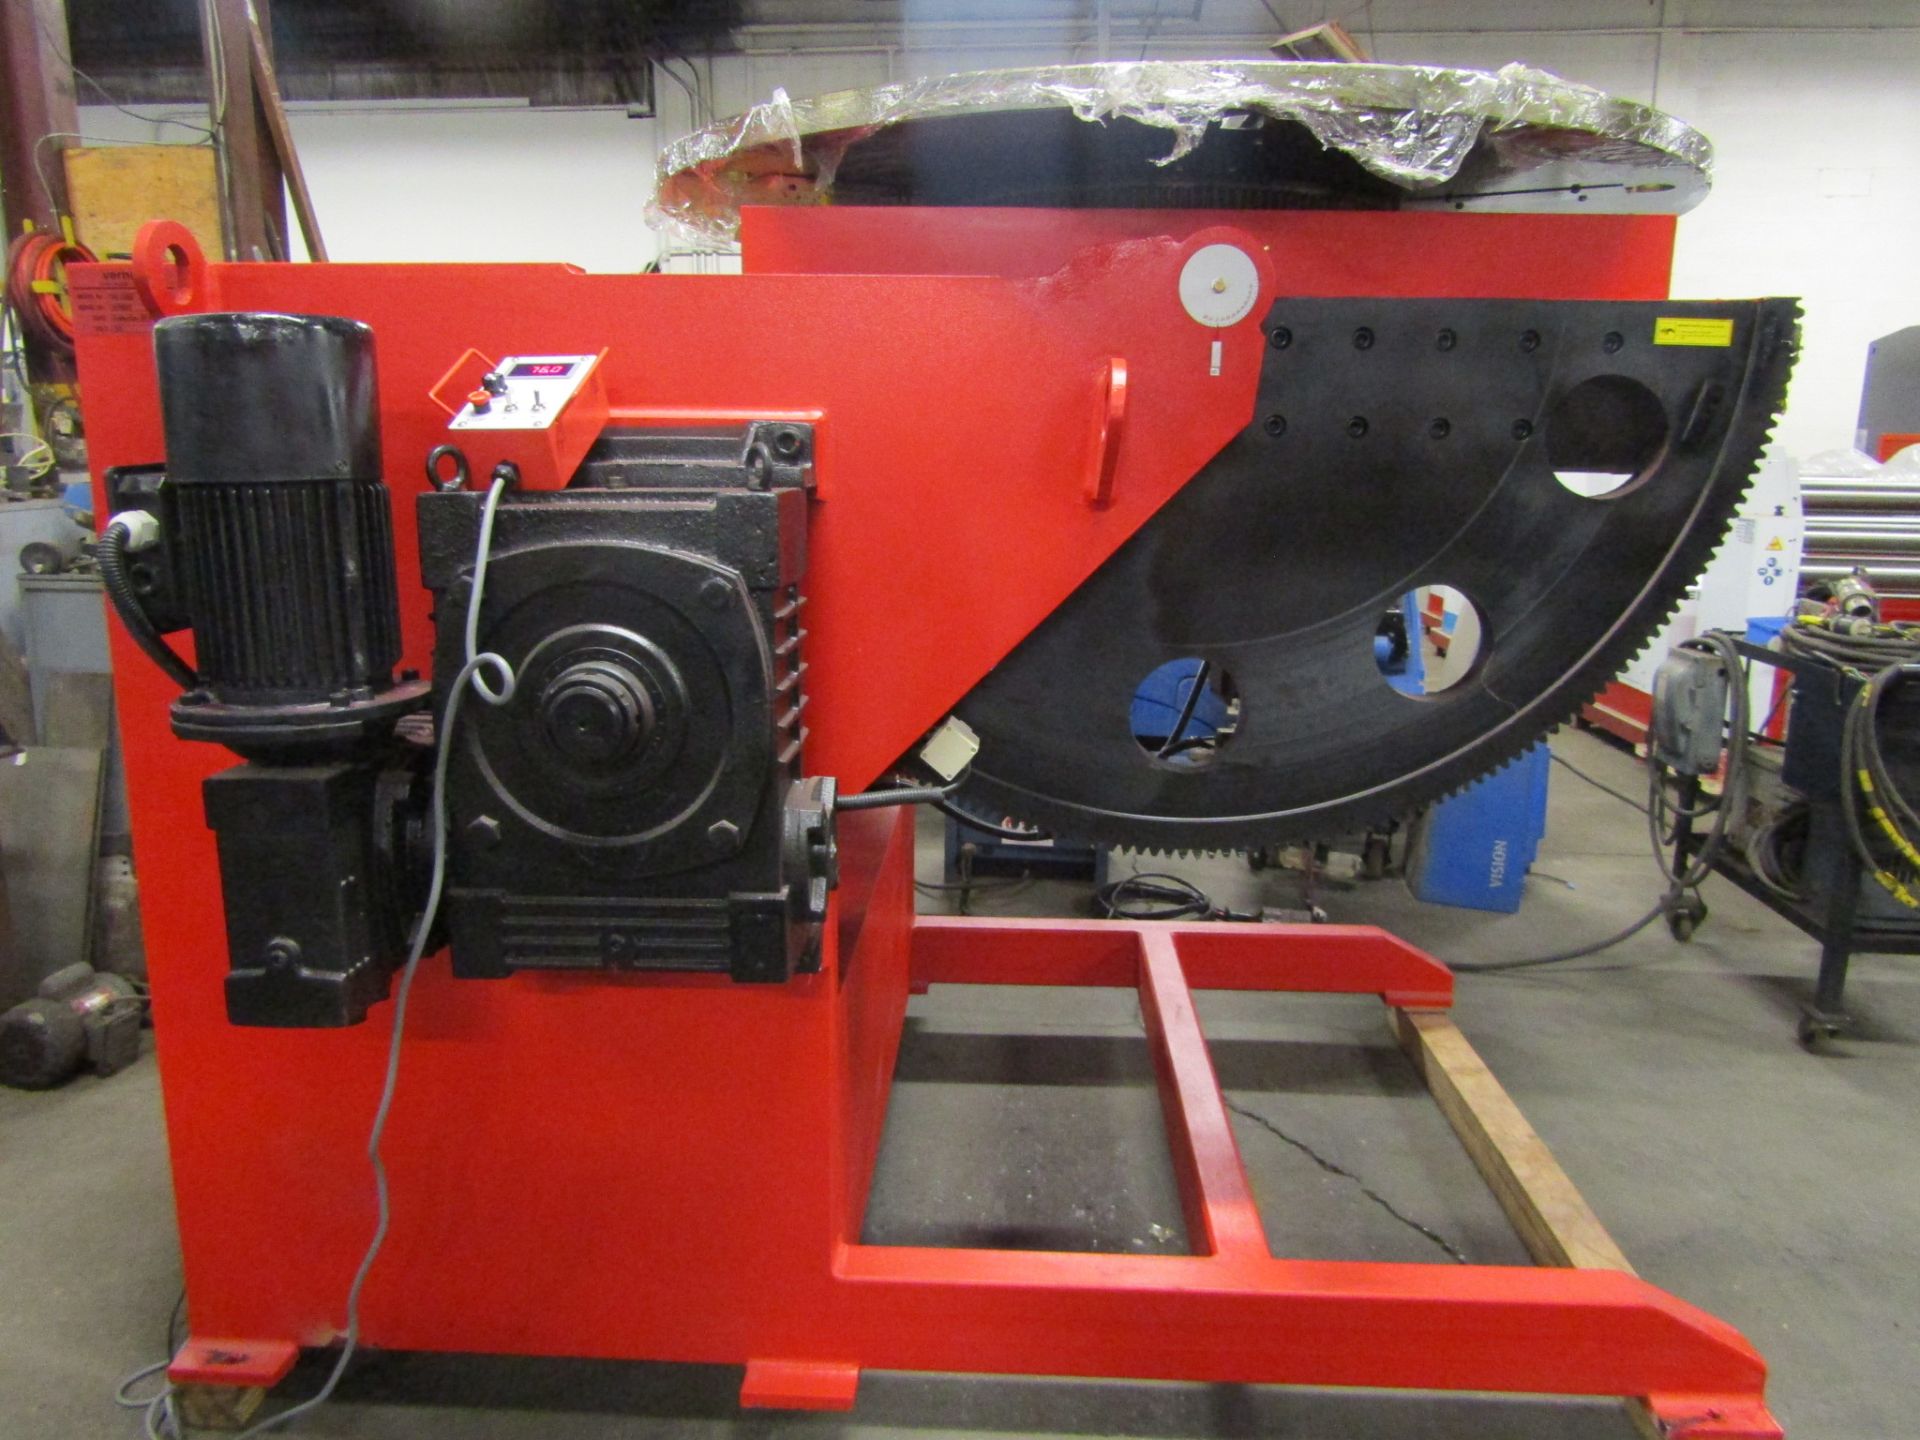 Verner model VD-15000 WELDING POSITIONER 15000lbs capacity - tilt and rotate with variable speed